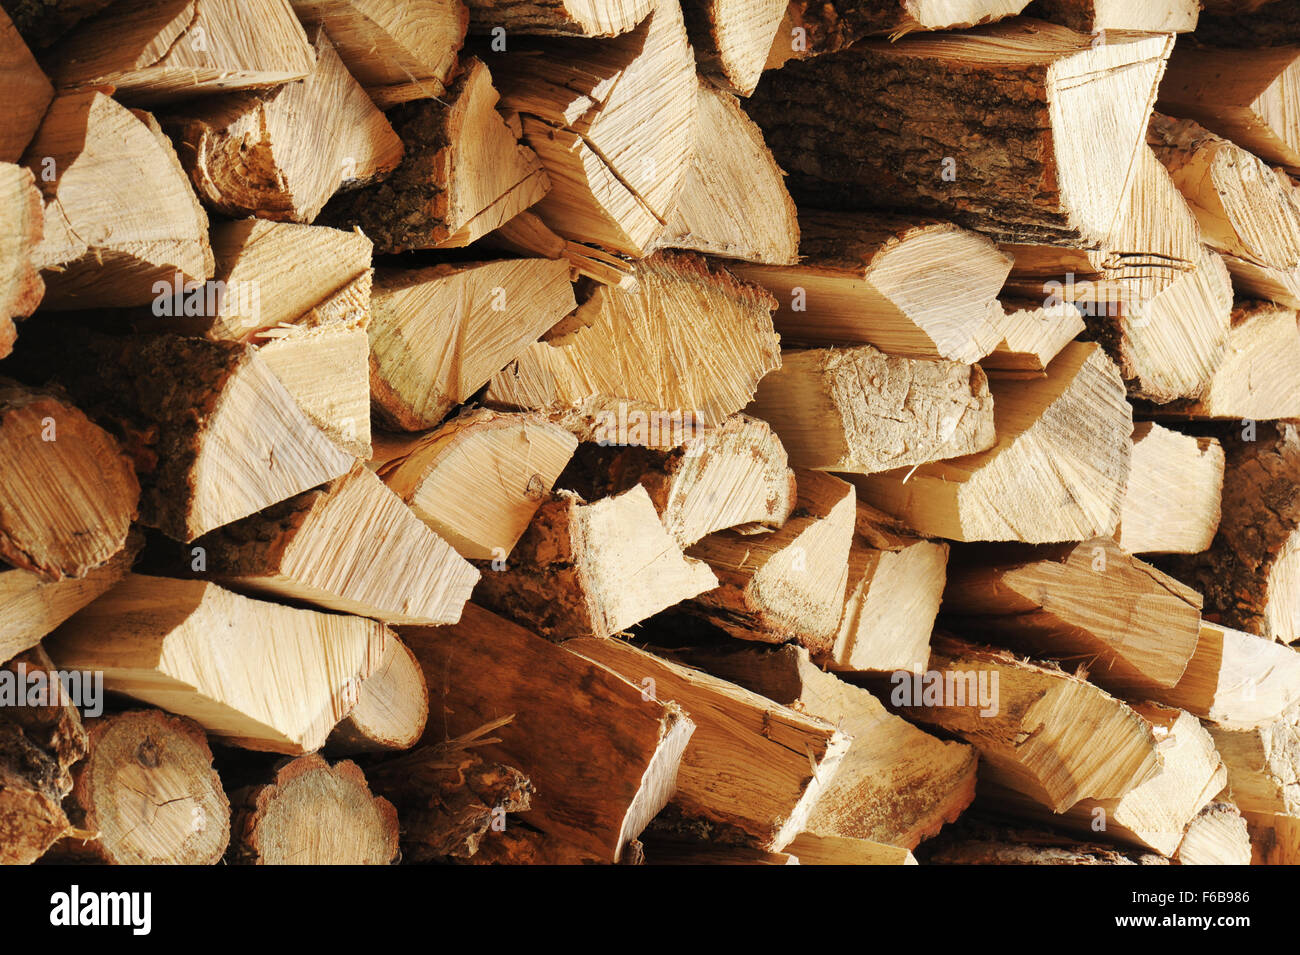 Dry chopped firewood logs in pile. Nature abstract background with stack of firewood. Stock Photo